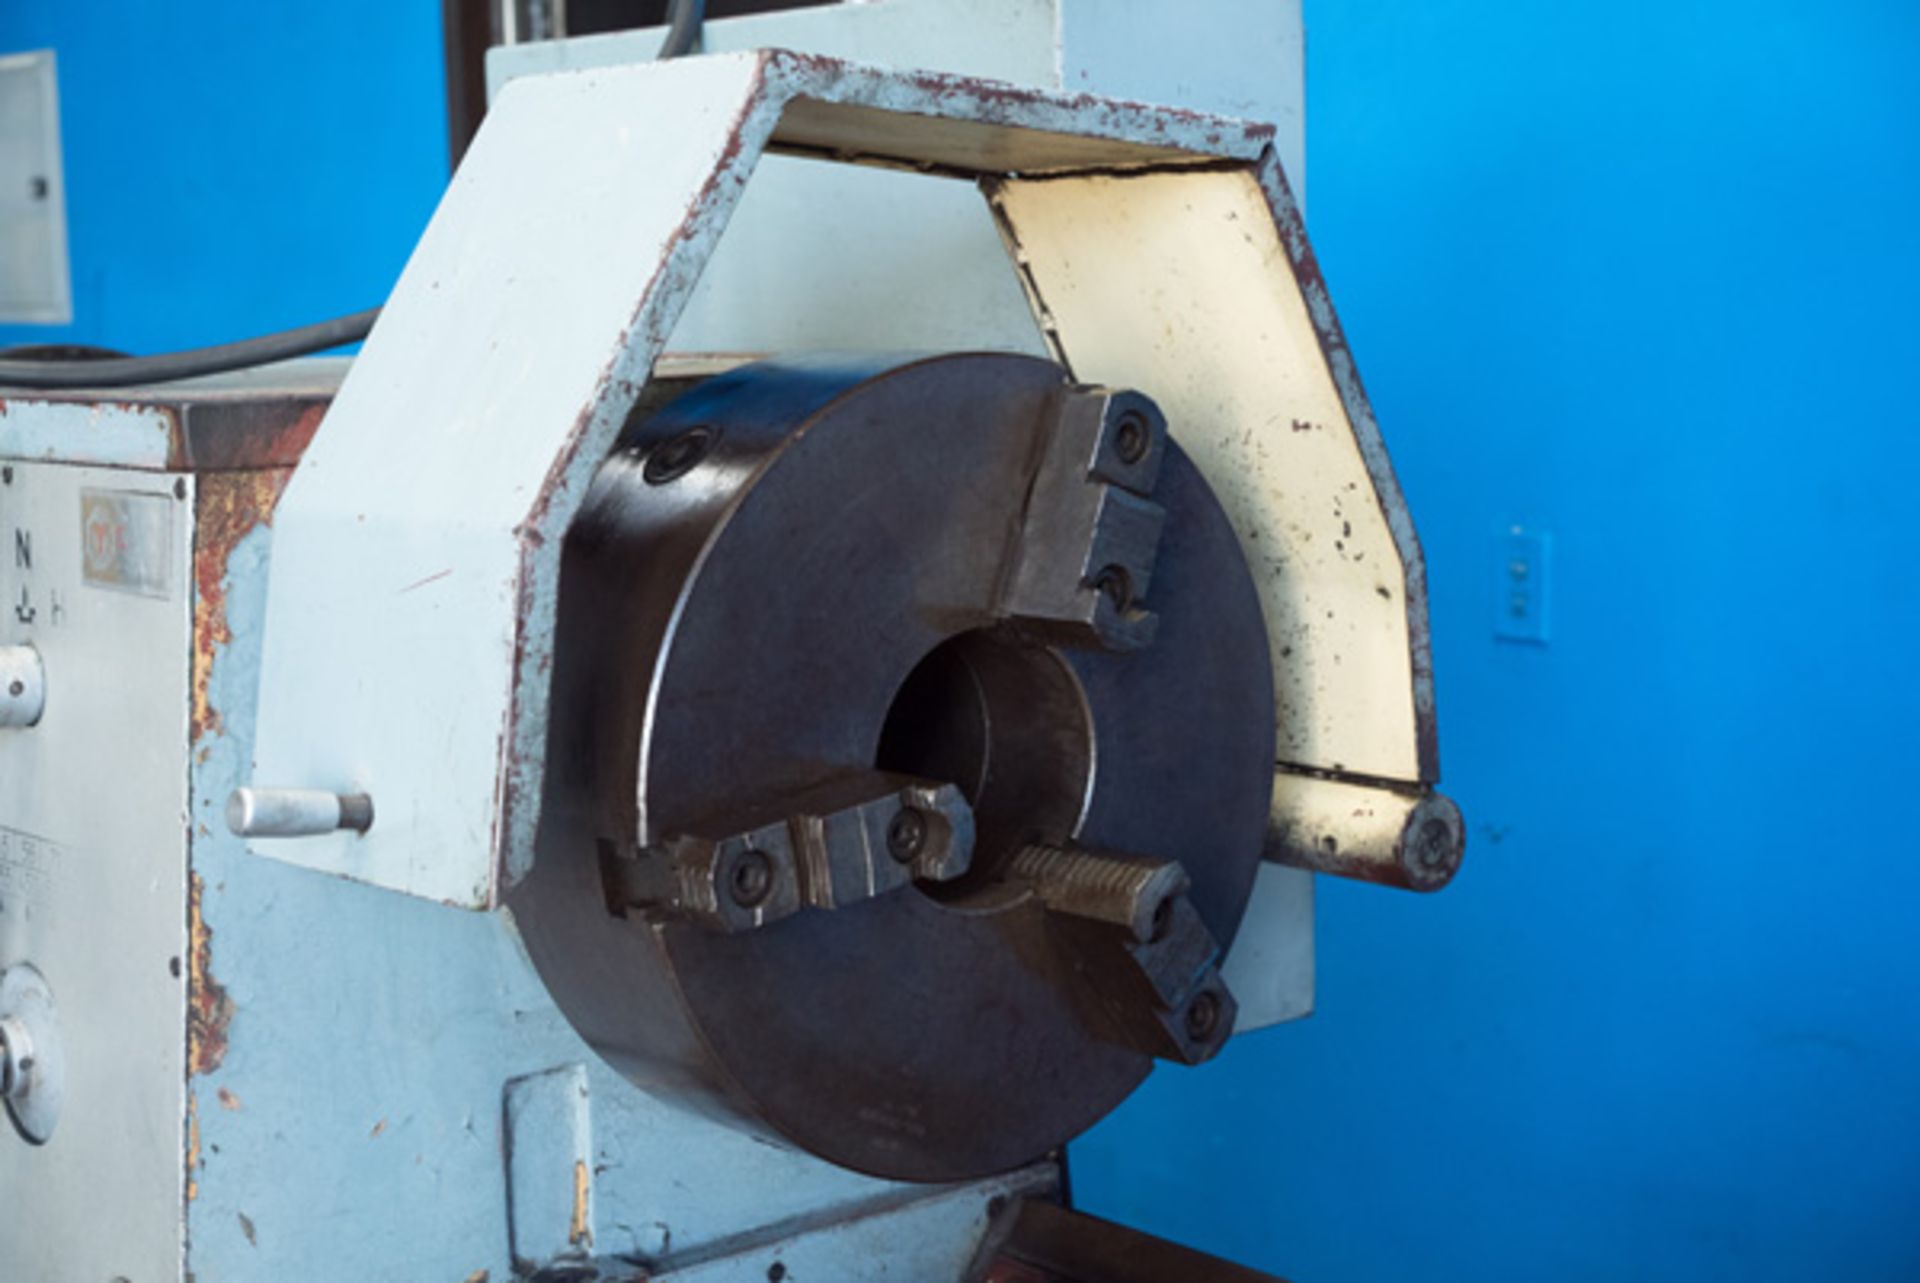 25" x 80" Polamco Engine Lathe Metal Turning Machining Dbl. Chuck 5.5" Hole - Located In: Huntington - Image 12 of 21